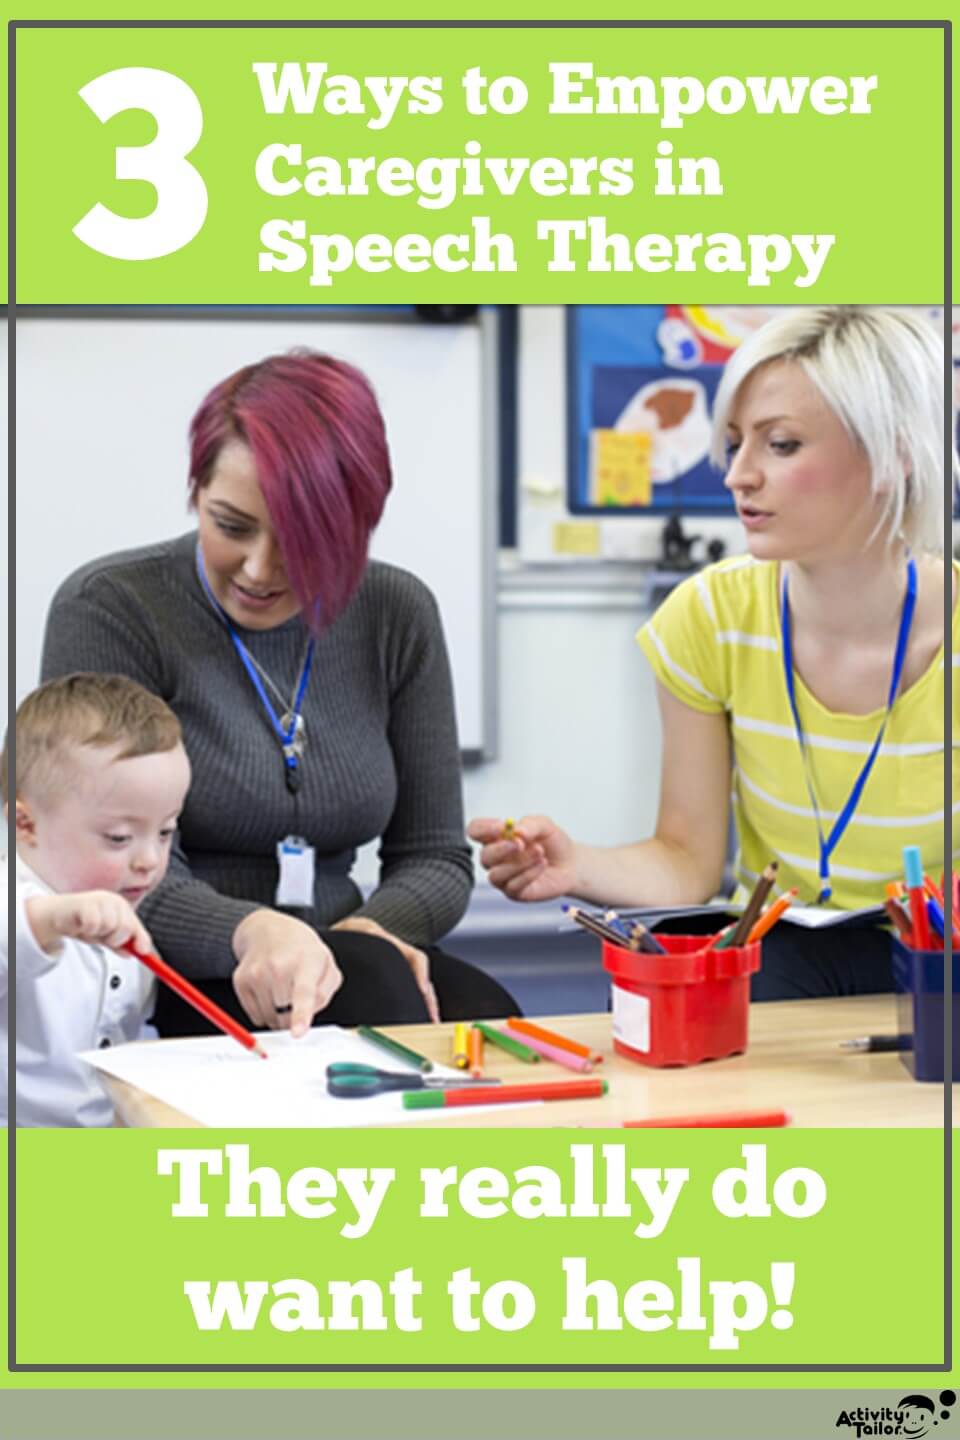 empower caregivers in speech therapy